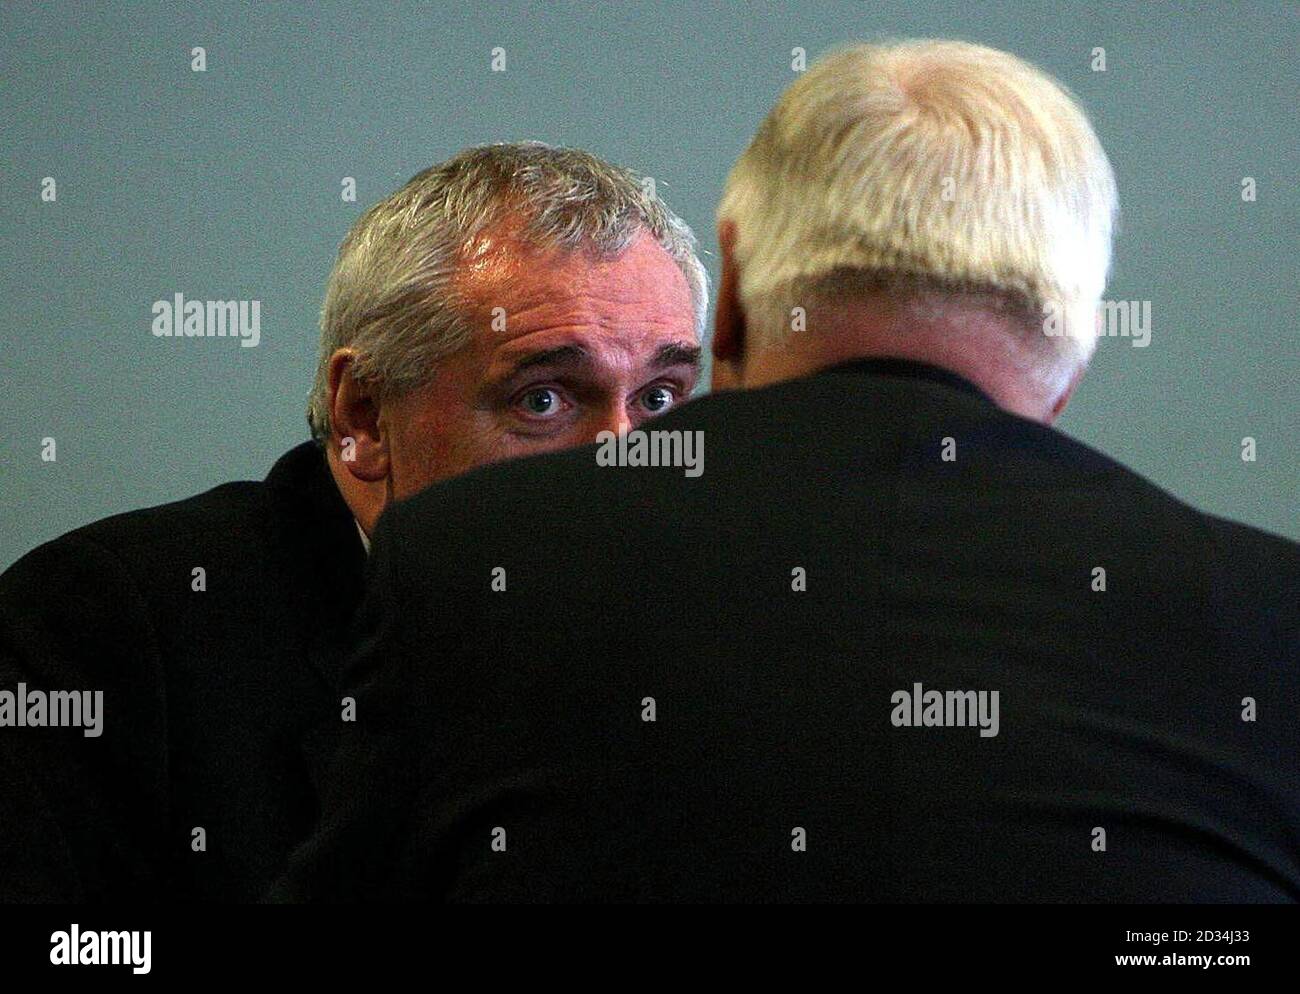 Taoiseach Bertie Ahern (left) has a quiet word with Lord Chris Patten at the Irish Bishops' Commission for Justice and Social Affairs conference called 'Common Good in an Unequal World' at Croke Park in Dublin, Thursday March 2, 2006. See PA story RELIGION Conference Ireland. PRESS ASSOCIATION Photo. Photo credit should read: Julien Behal/PA Stock Photo